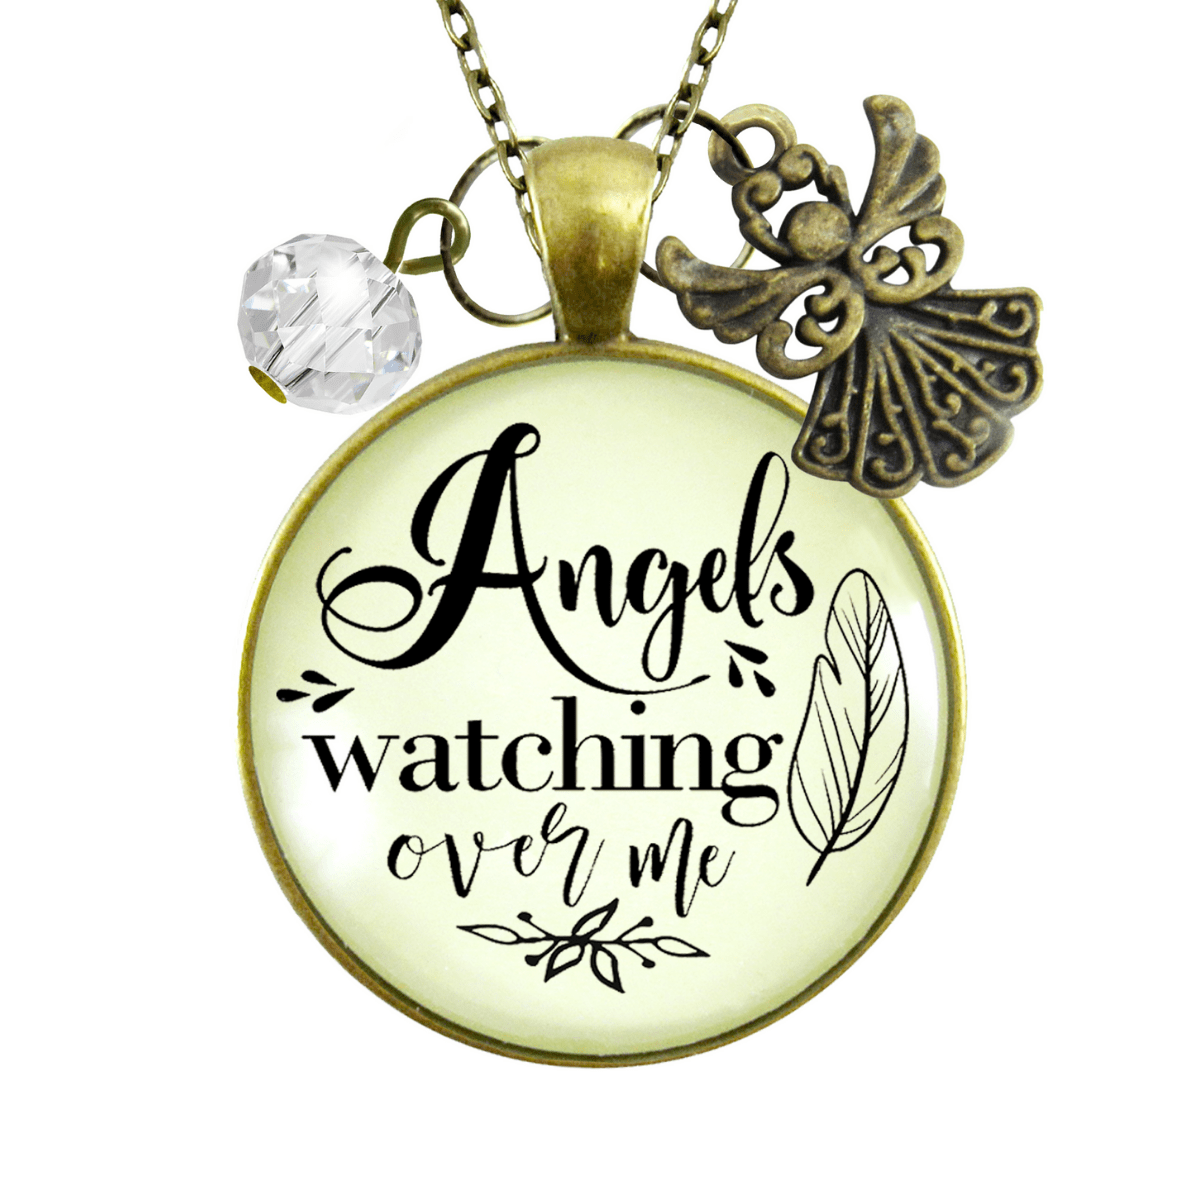 Gutsy Goodness Angels Watching Over Me Neccklace Memorial Heaven Inspired Jewelry - Gutsy Goodness Handmade Jewelry;Angels Watching Over Me Neccklace Memorial Heaven Inspired Jewelry - Gutsy Goodness Handmade Jewelry Gifts